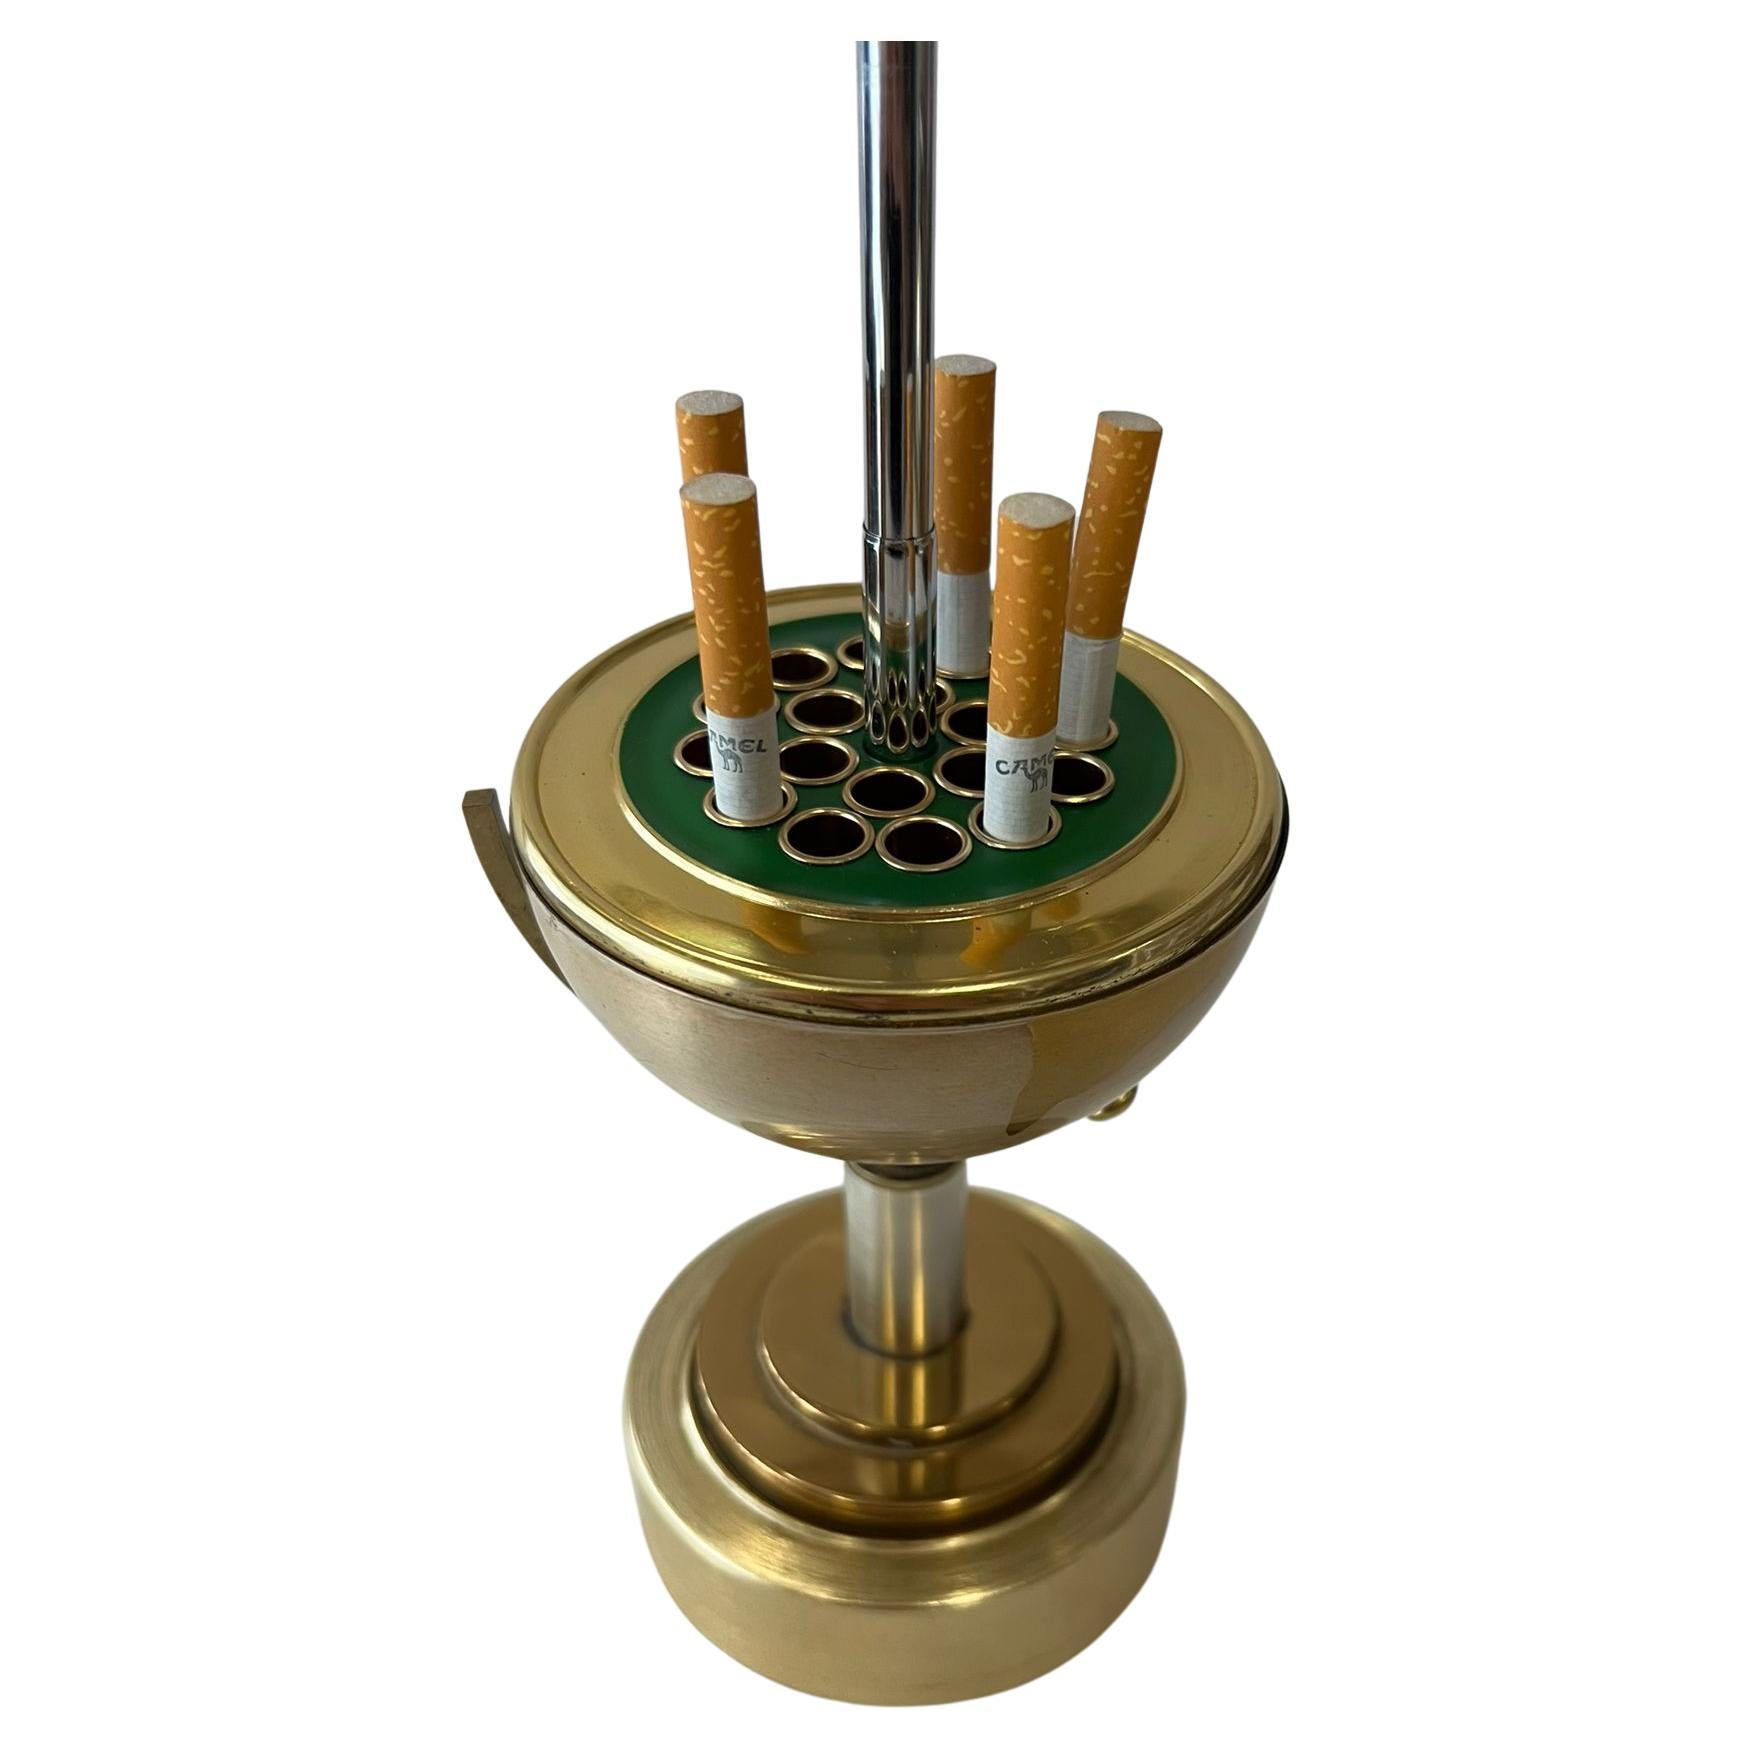 Globe Cigarette Dispenser with Music Playing Globe Lighter, Brass, Germany, 1950 For Sale 3